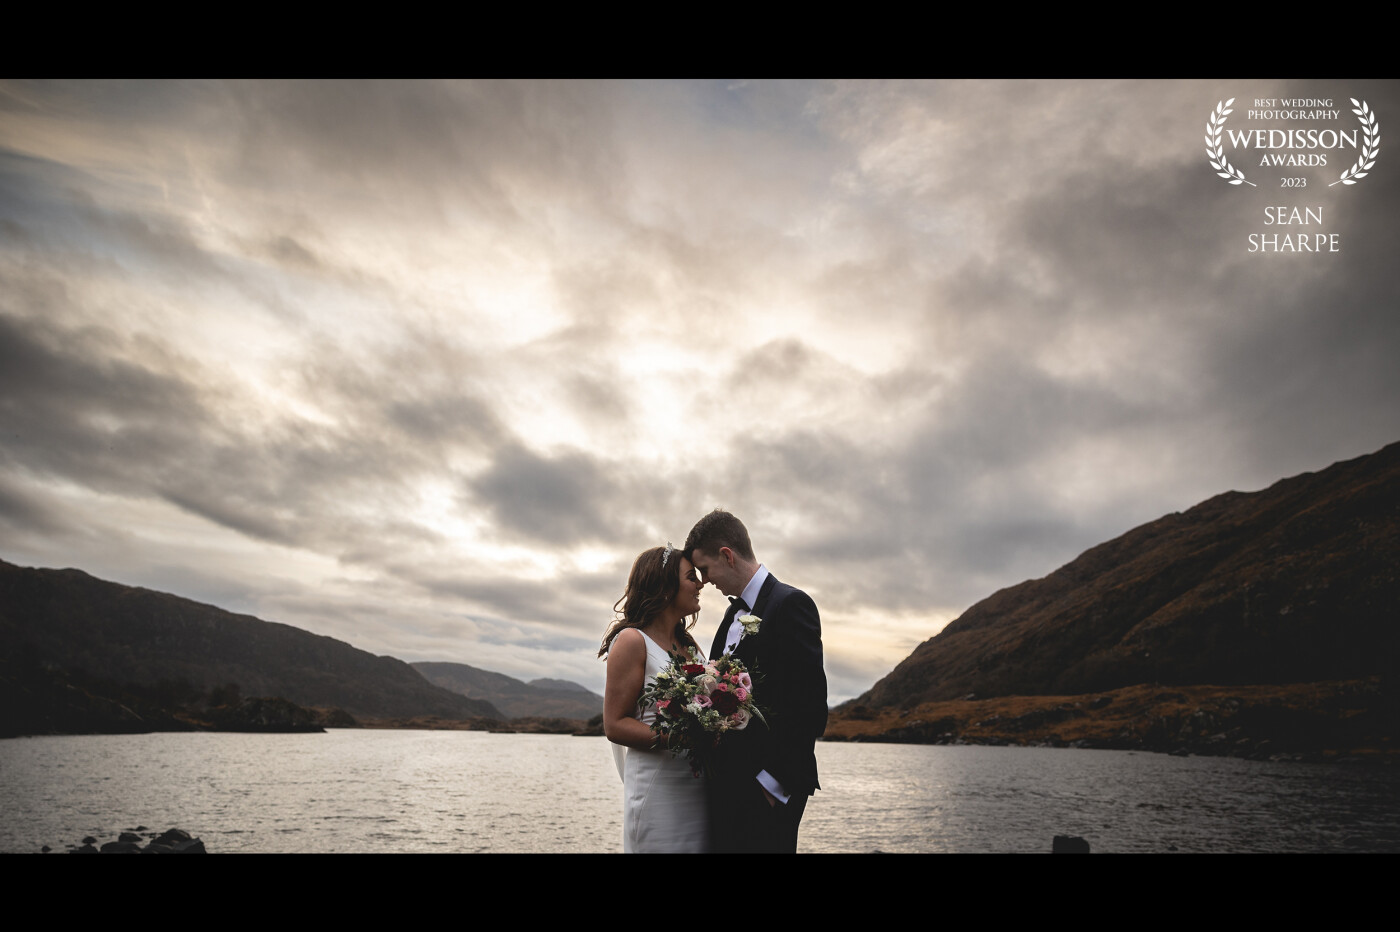 Grainne and Sean. Sub zero temperatures for their entire wedding day but the light was just superb! Always gorgeous in the beautiful Killarney National Park!